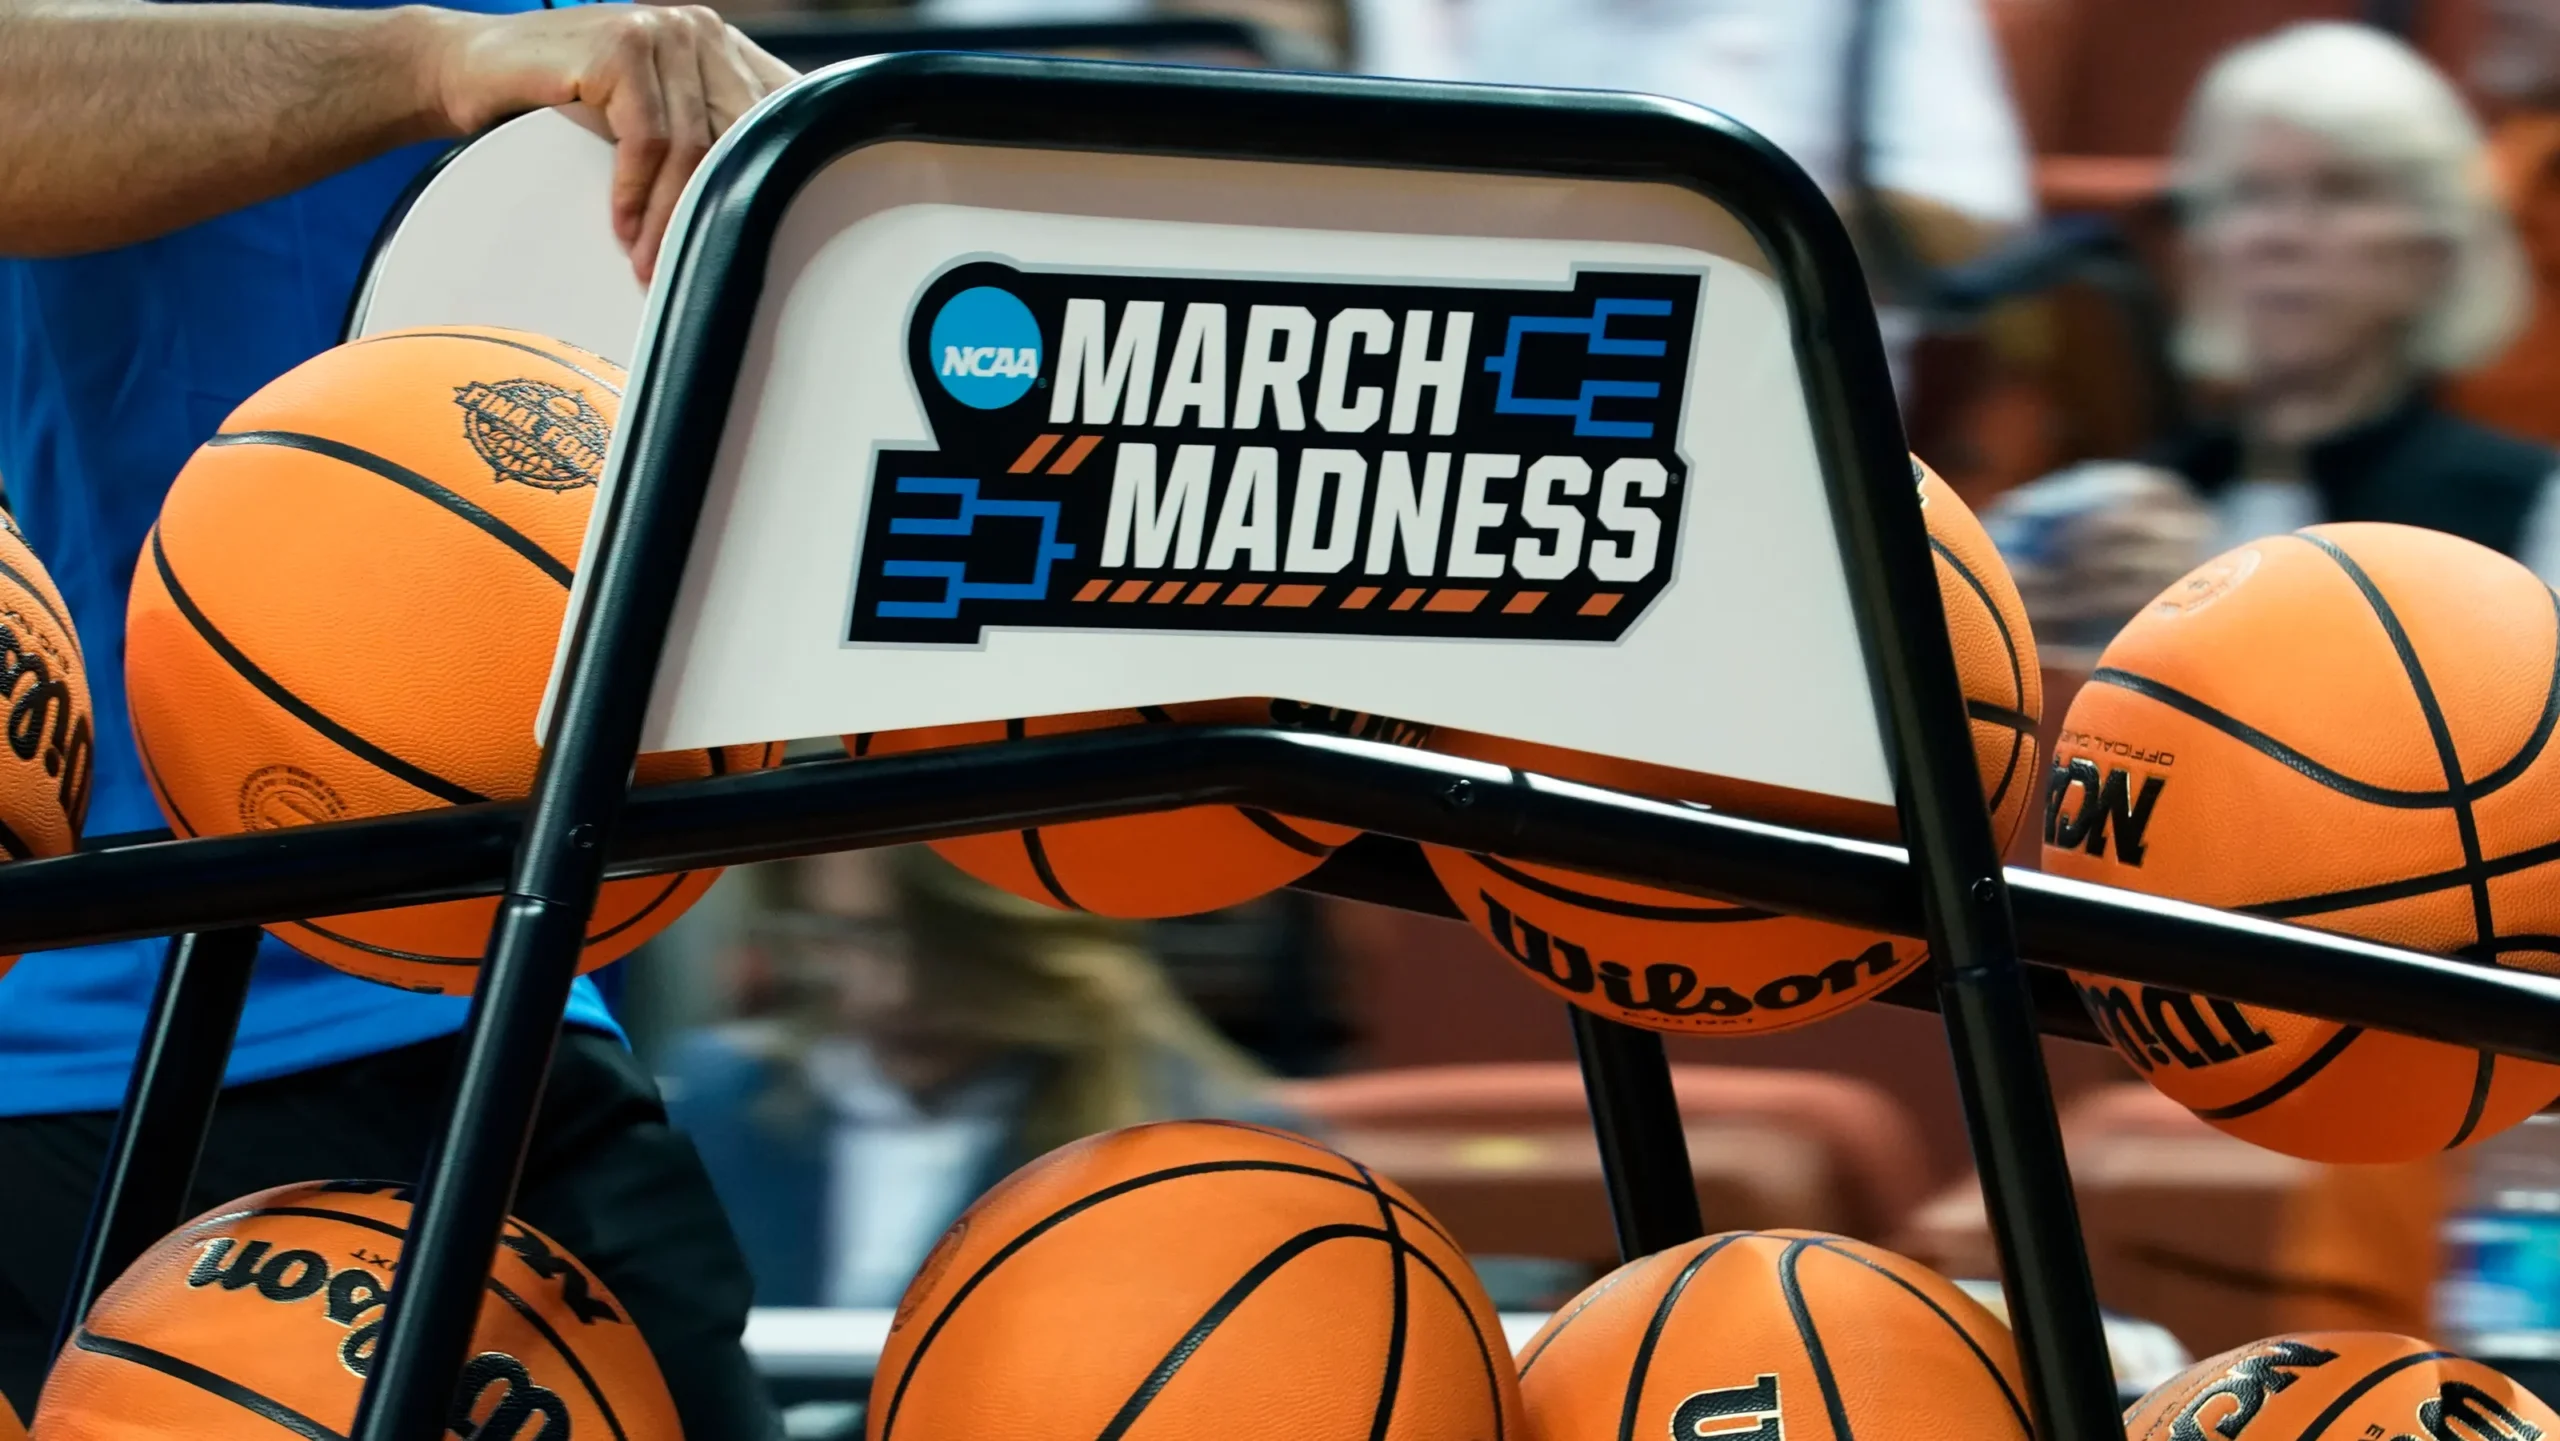 Tips for Traveling During March Madness